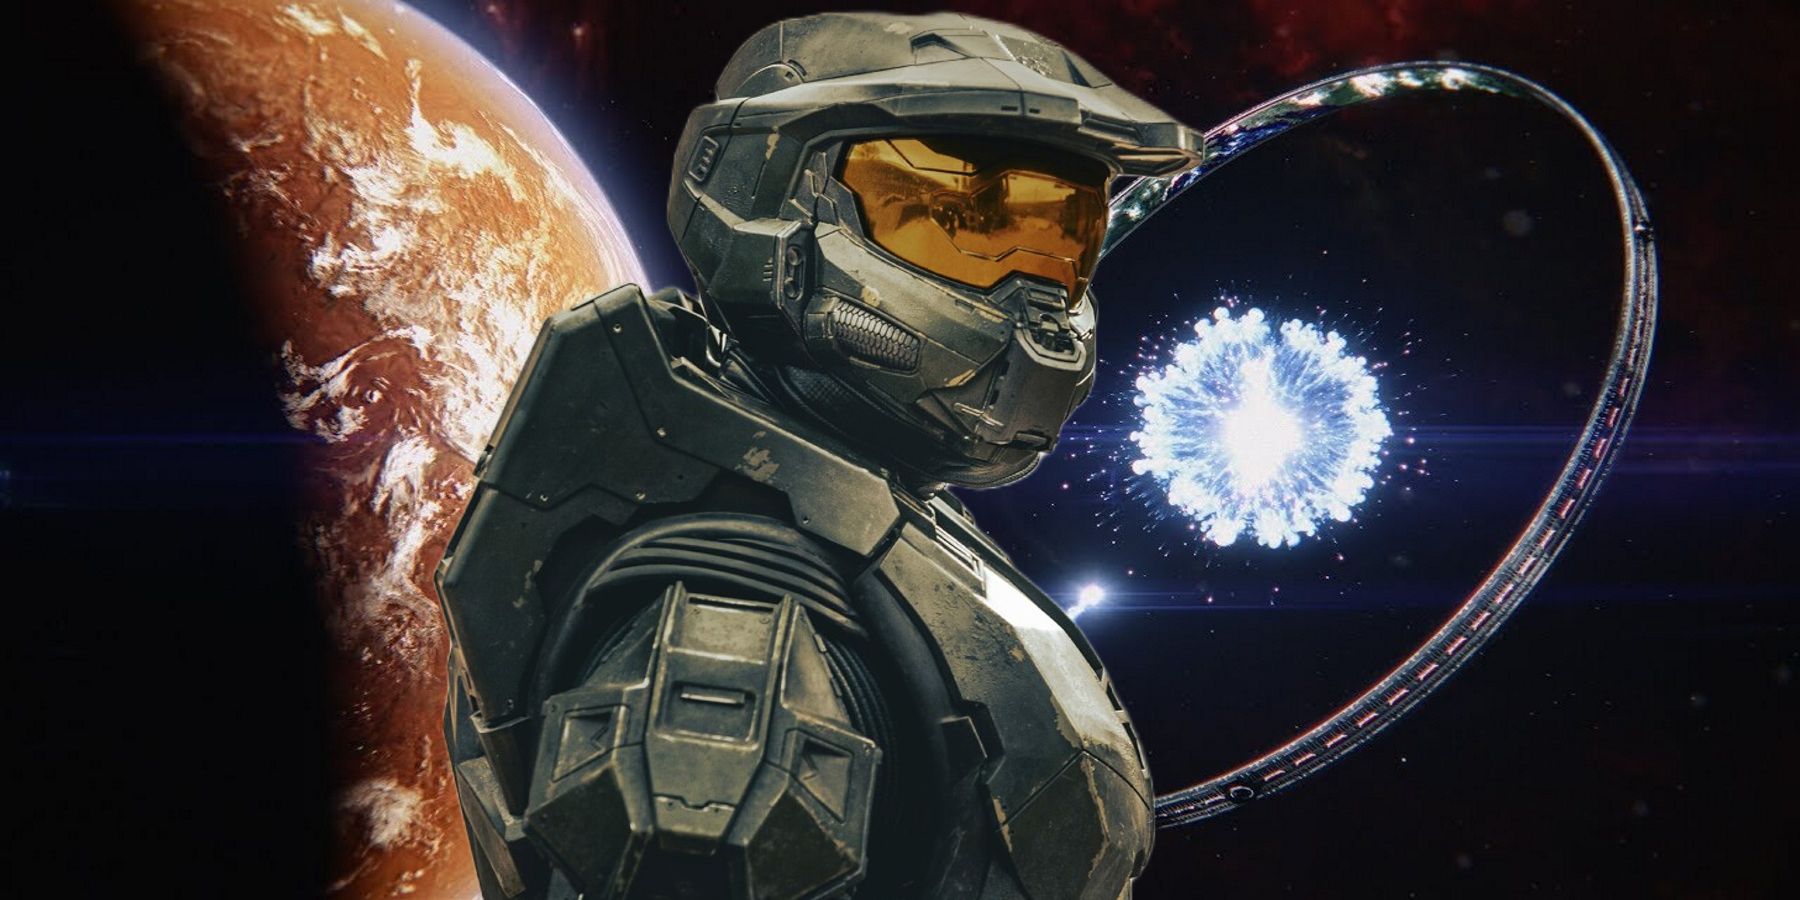 Halo Season 2: Release Date, Cast, Story & Everything We Know